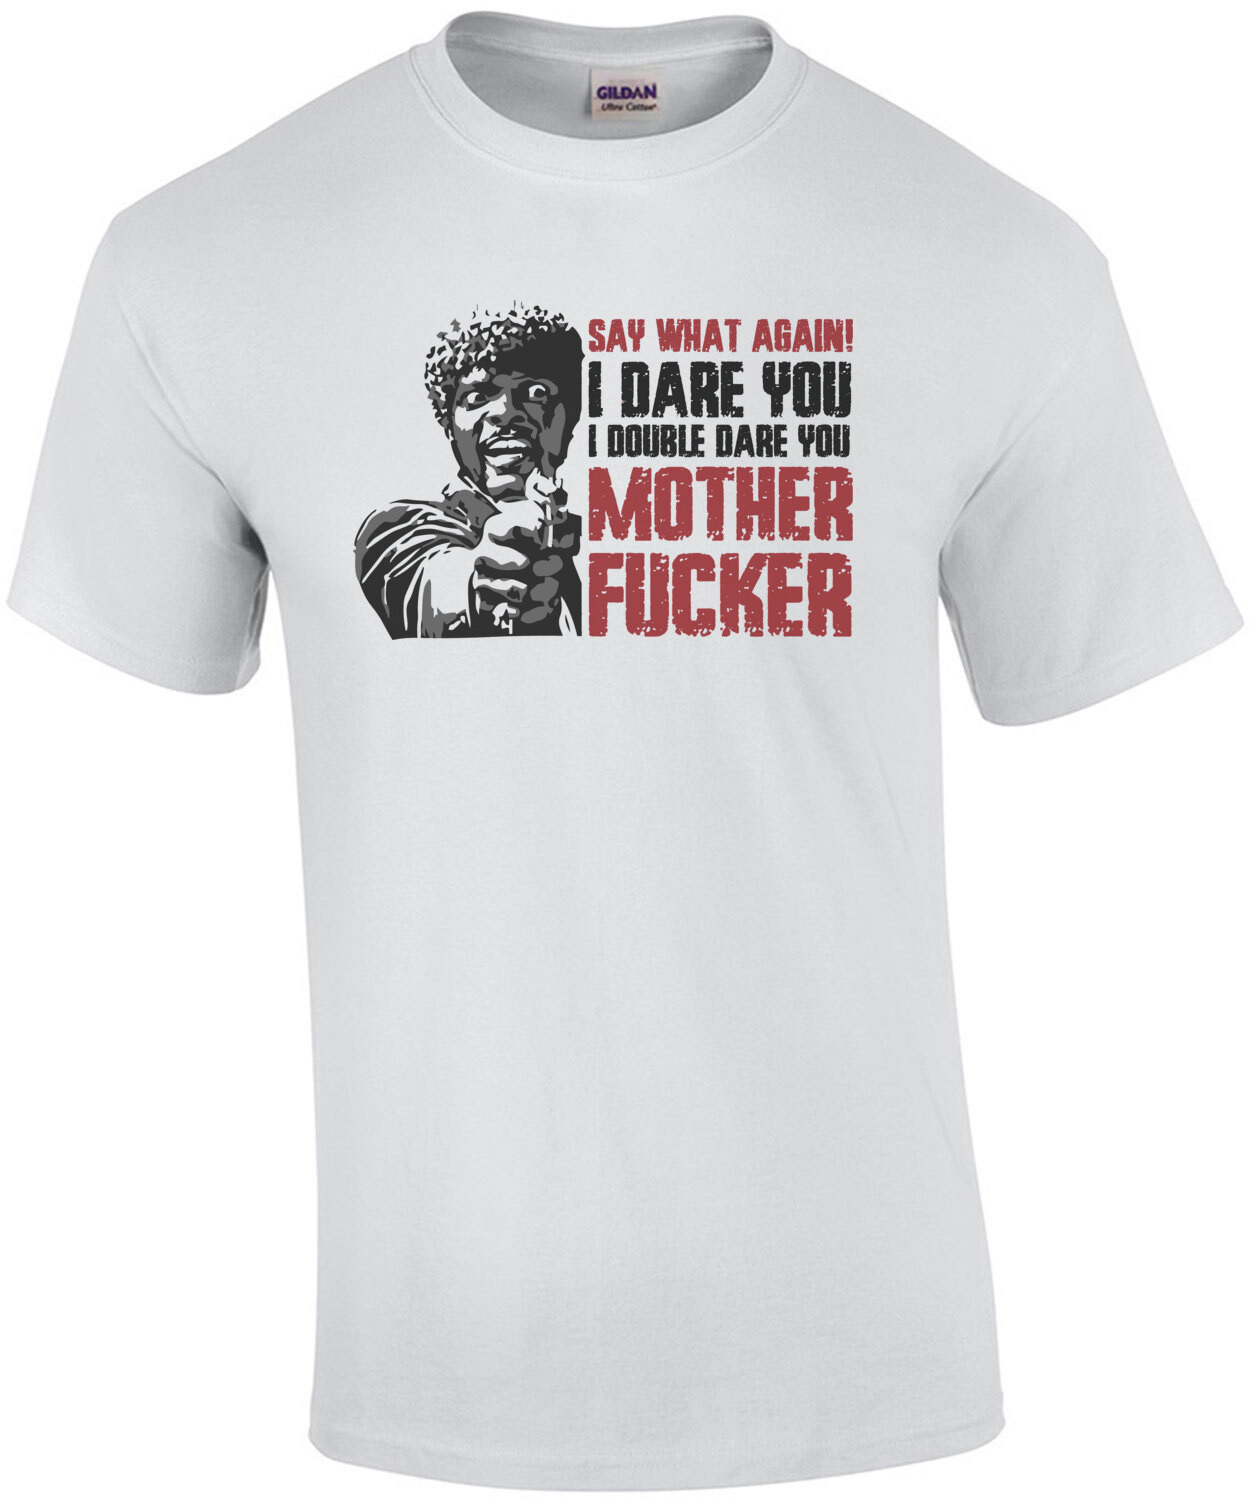 Say what again! I dare you I double dare you mother fucker - Jules - Samual L Jackson - Pulp Fiction - 90's T-Shirt